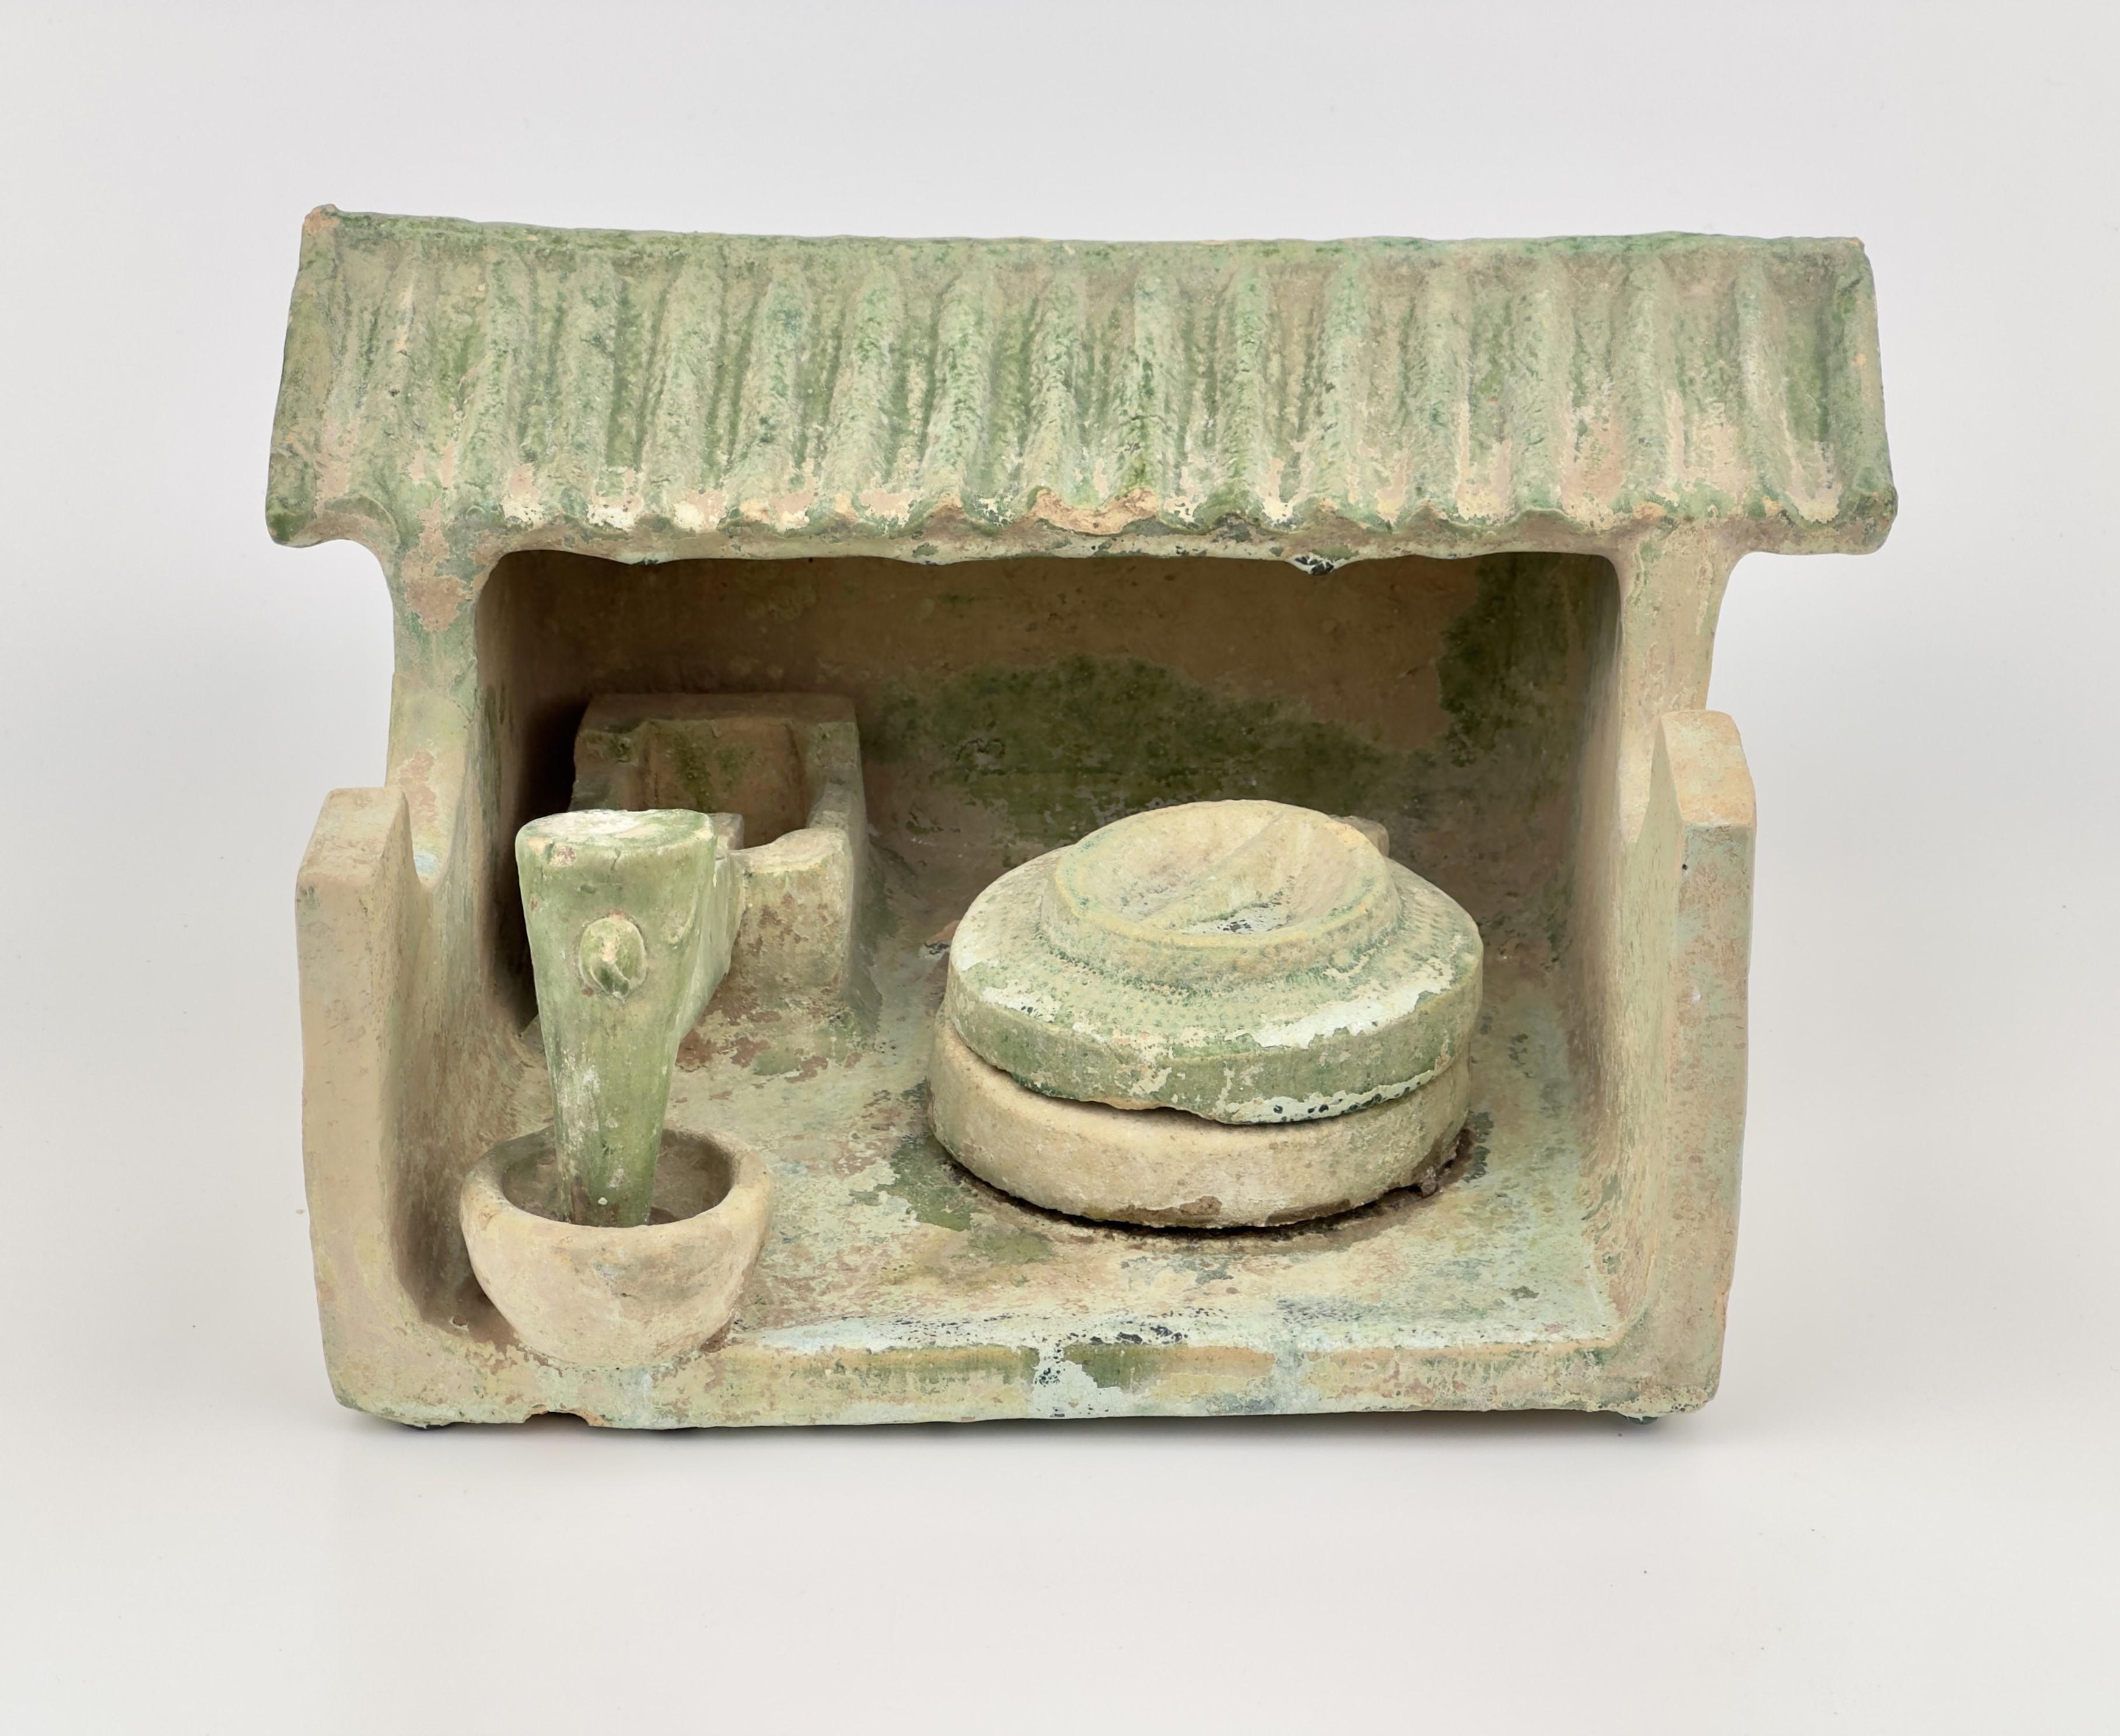 Made from the standard orange earthenware body of Han green glazed tomb models, this miniature milling station features a circular millstone and a foot-operated mortar and pestle grain pounder under its shed roof. Both of these farm tools can still